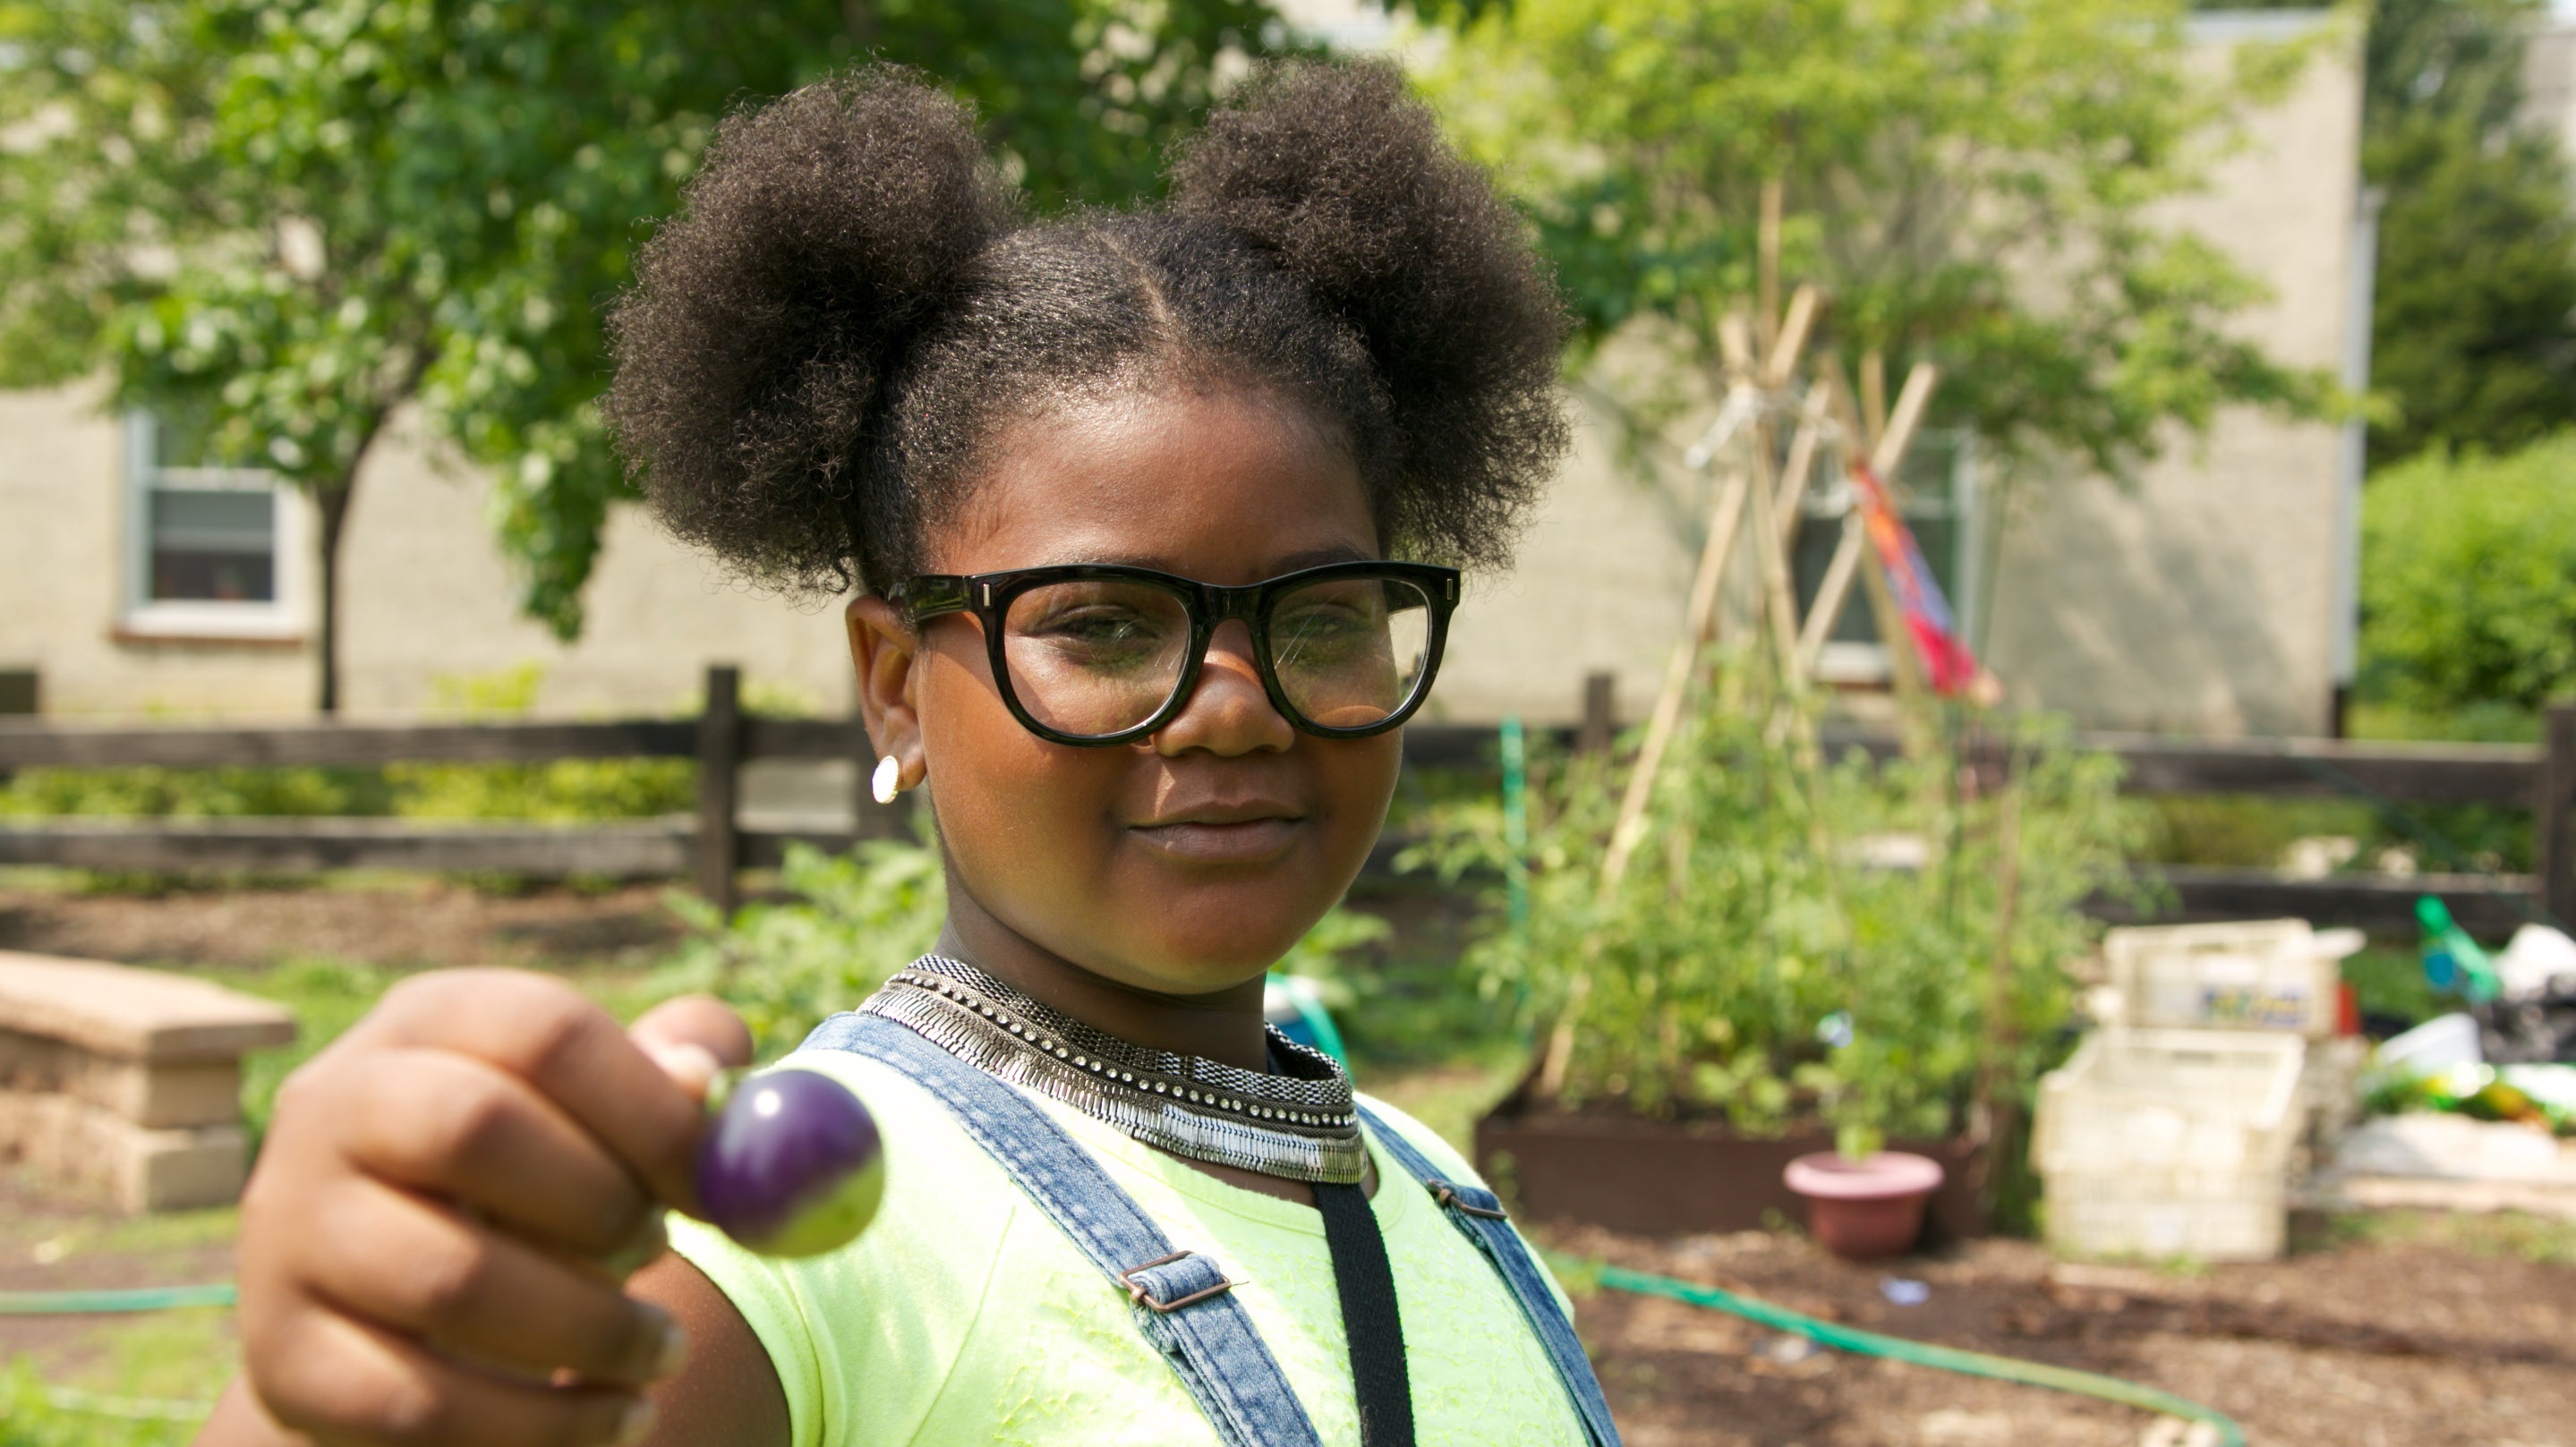  Tahtanique Smith holds up an almost-ripe Cherokee purple tomato grown on the farm. (Nathaniel Hamilton/For Newsworks) 